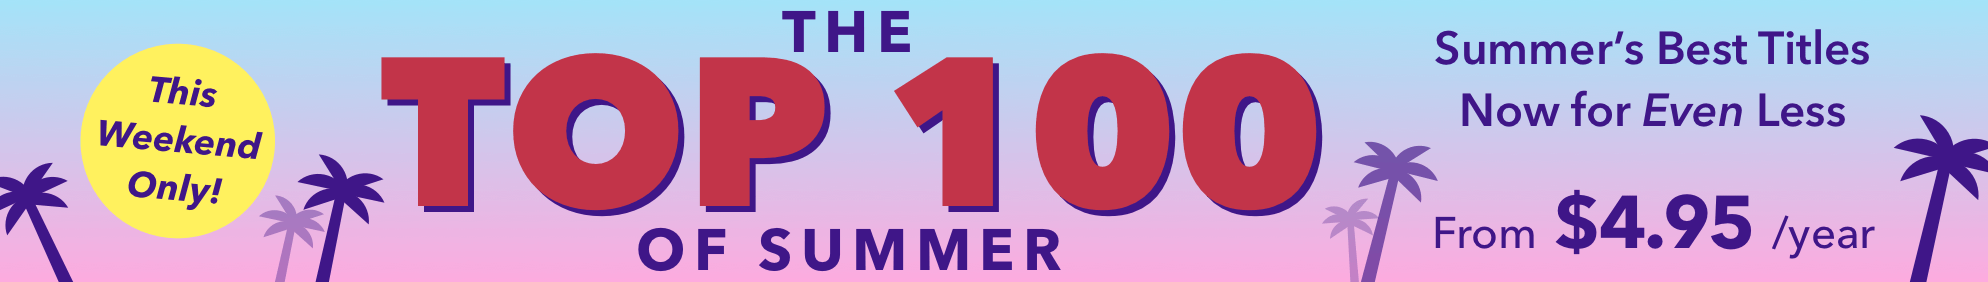 Top 100 Sale August 2018